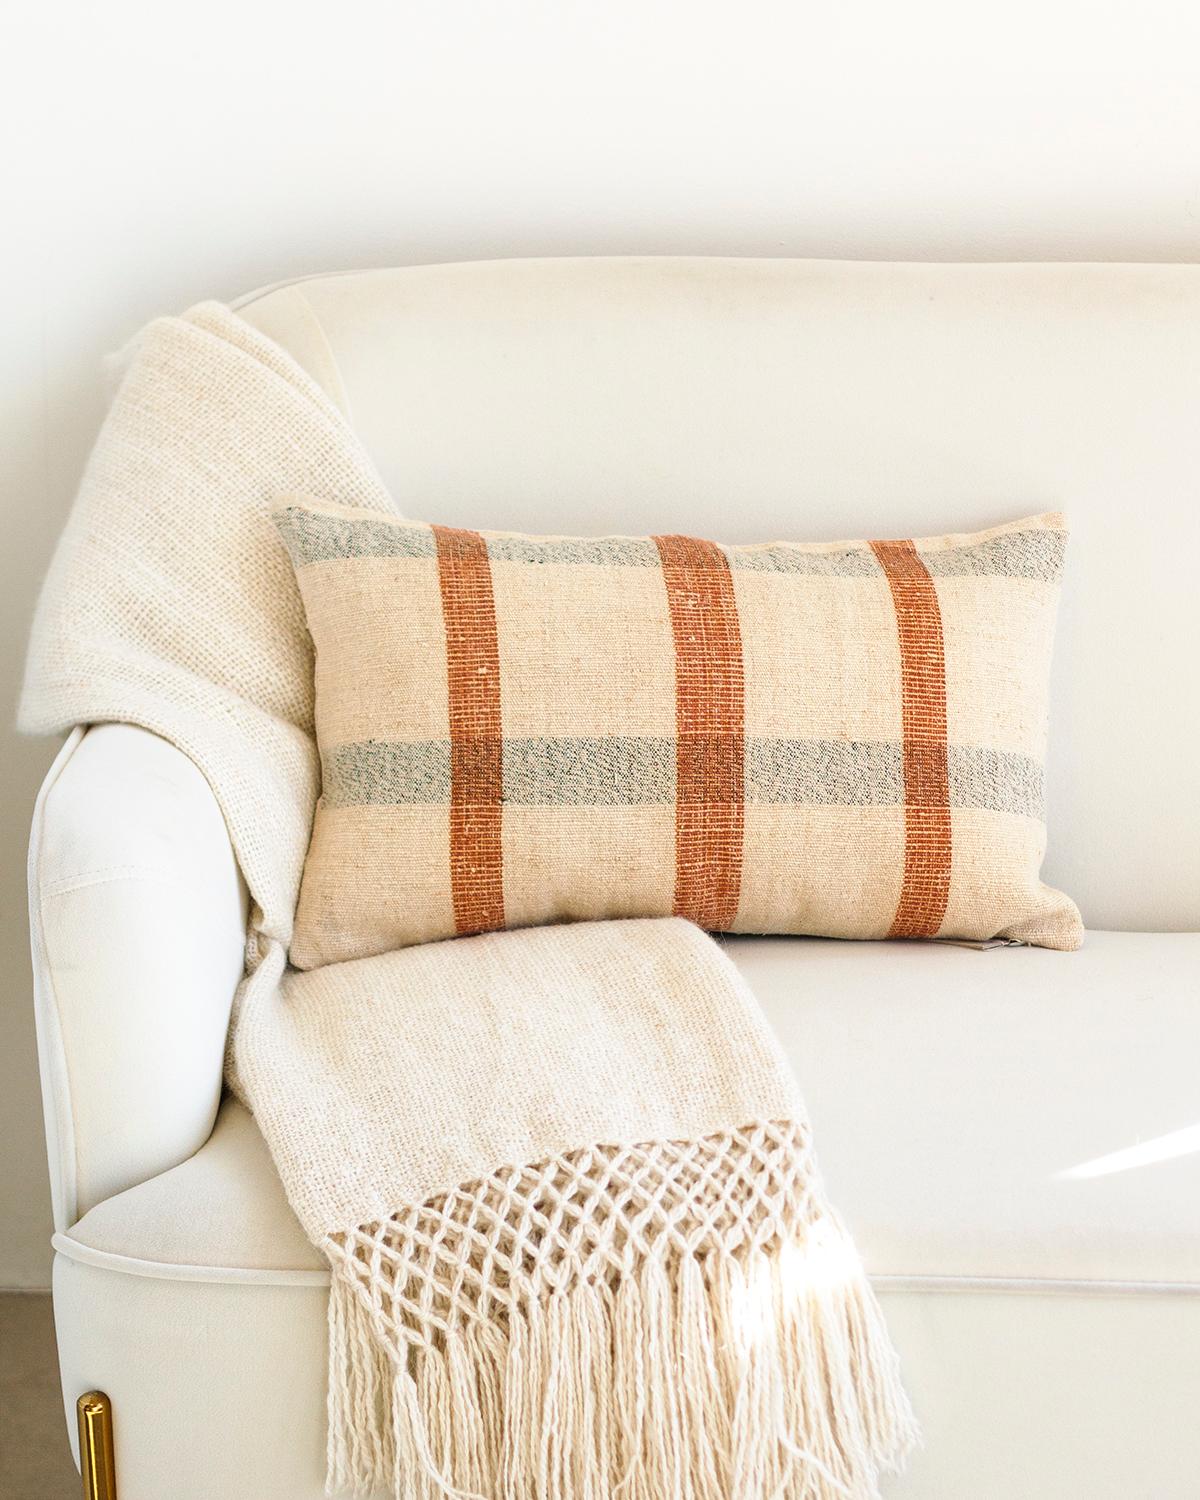 One of a kind vintage linen throw pillows to beautify your home

A hundred years ago these fabrics used to be cereal sacks in Northern Portugal. Now they get rediscovered and transformed into a rare collectible. This Matilde Siena and Navy Checkered